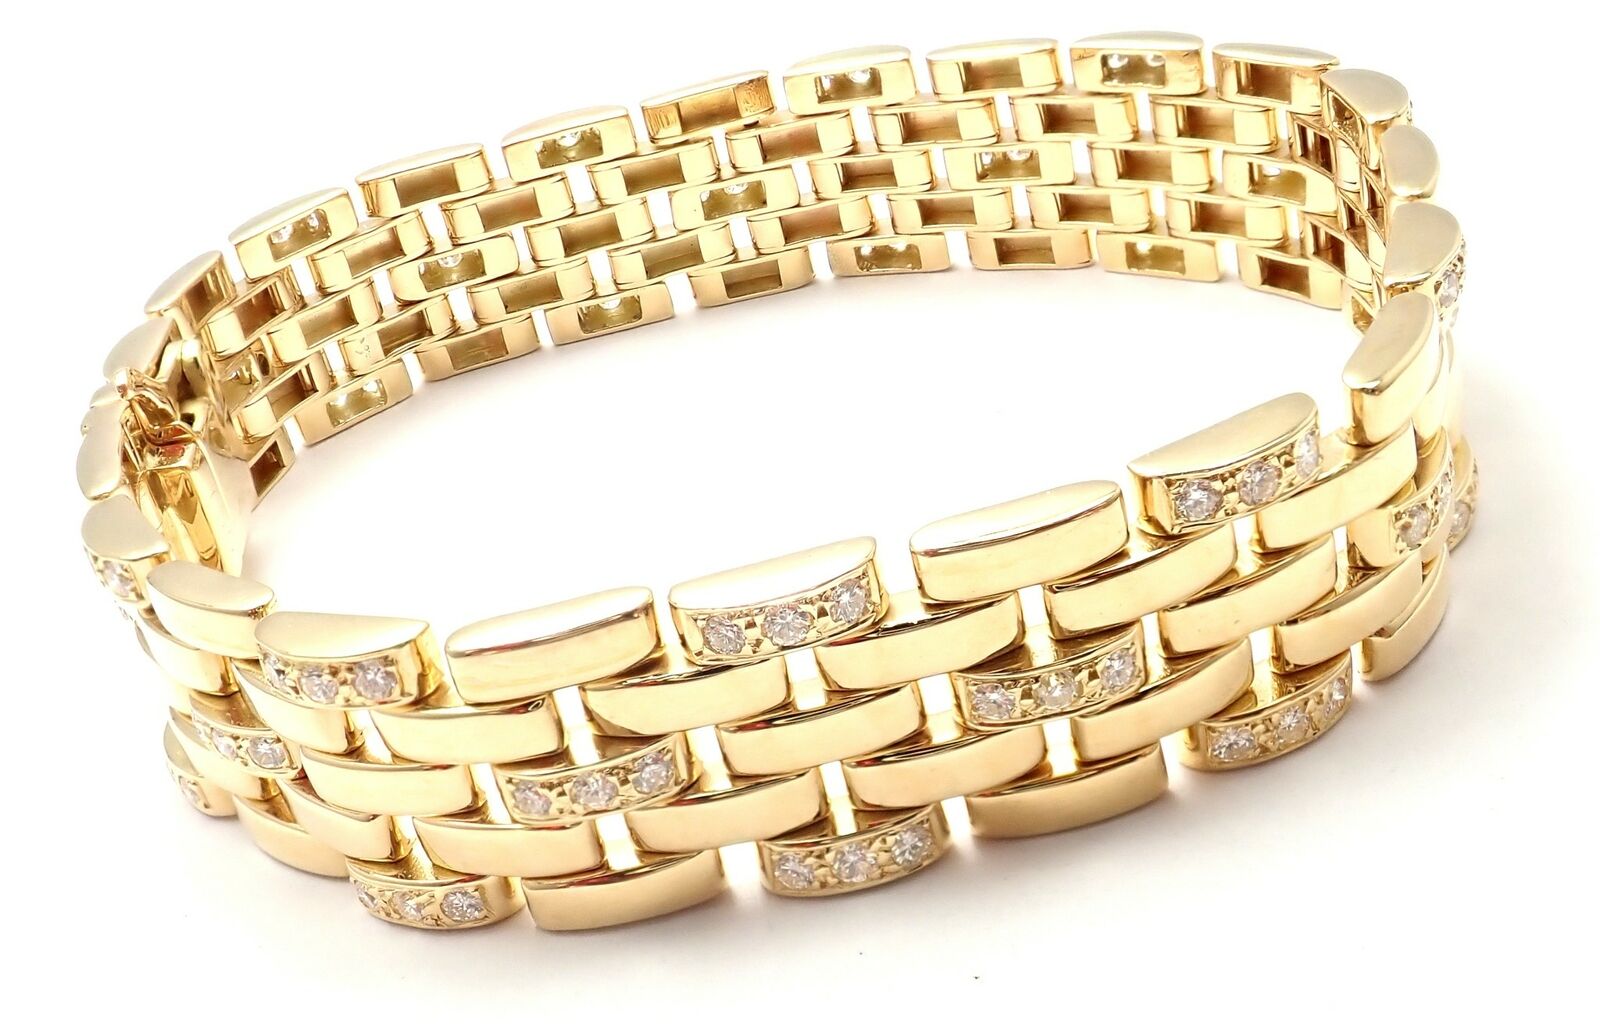 Cartier Jewelry & Watches:Fine Jewelry:Bracelets & Charms Authentic Cartier Maillon Panthere 18K Gold Diamond Five Row Link Gold Bracelet